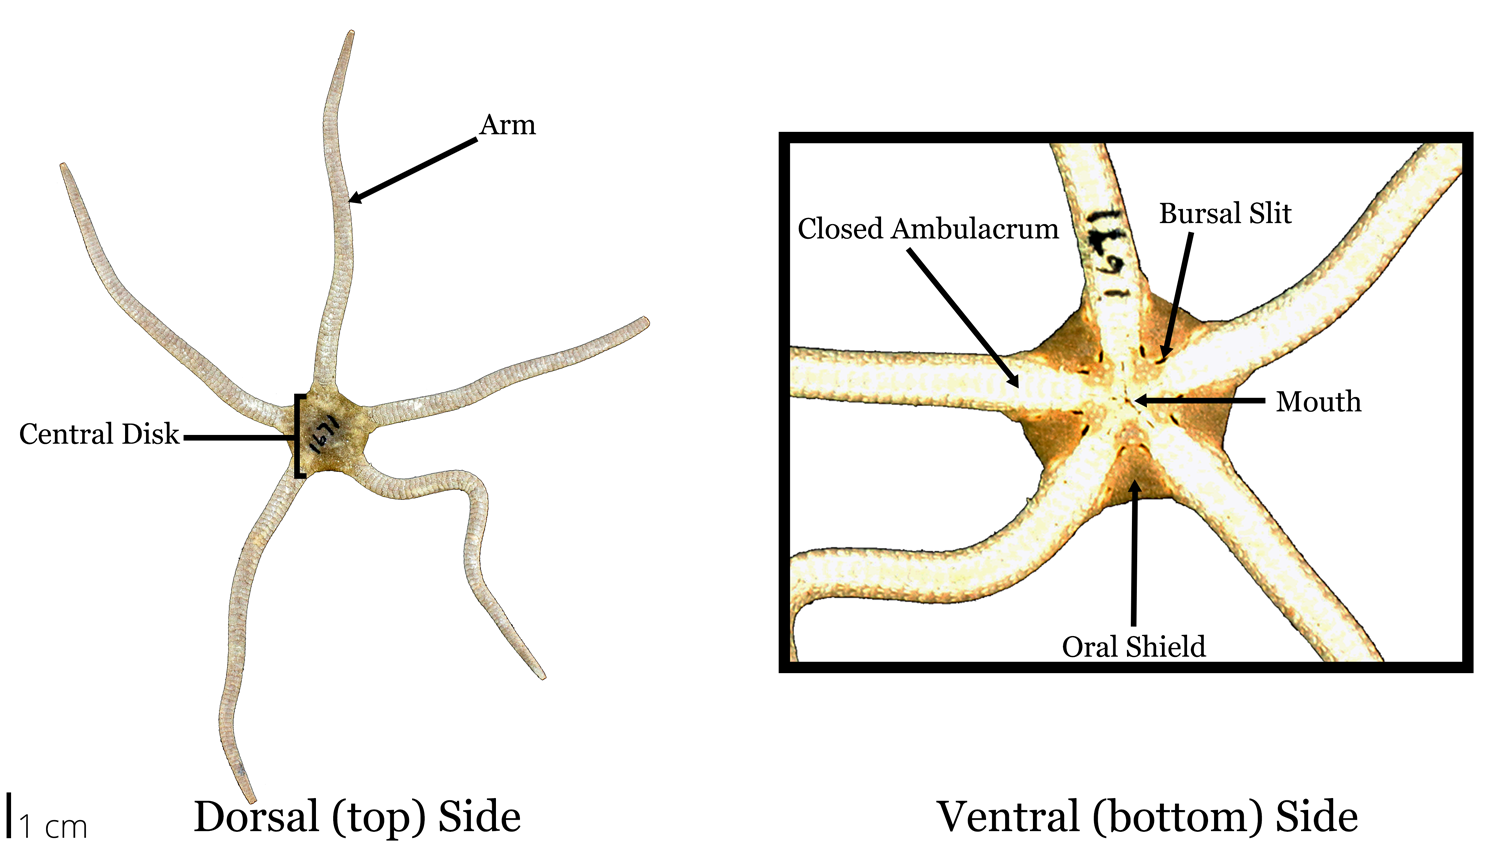 Photograph of a brittle star specimen with labelled morphology